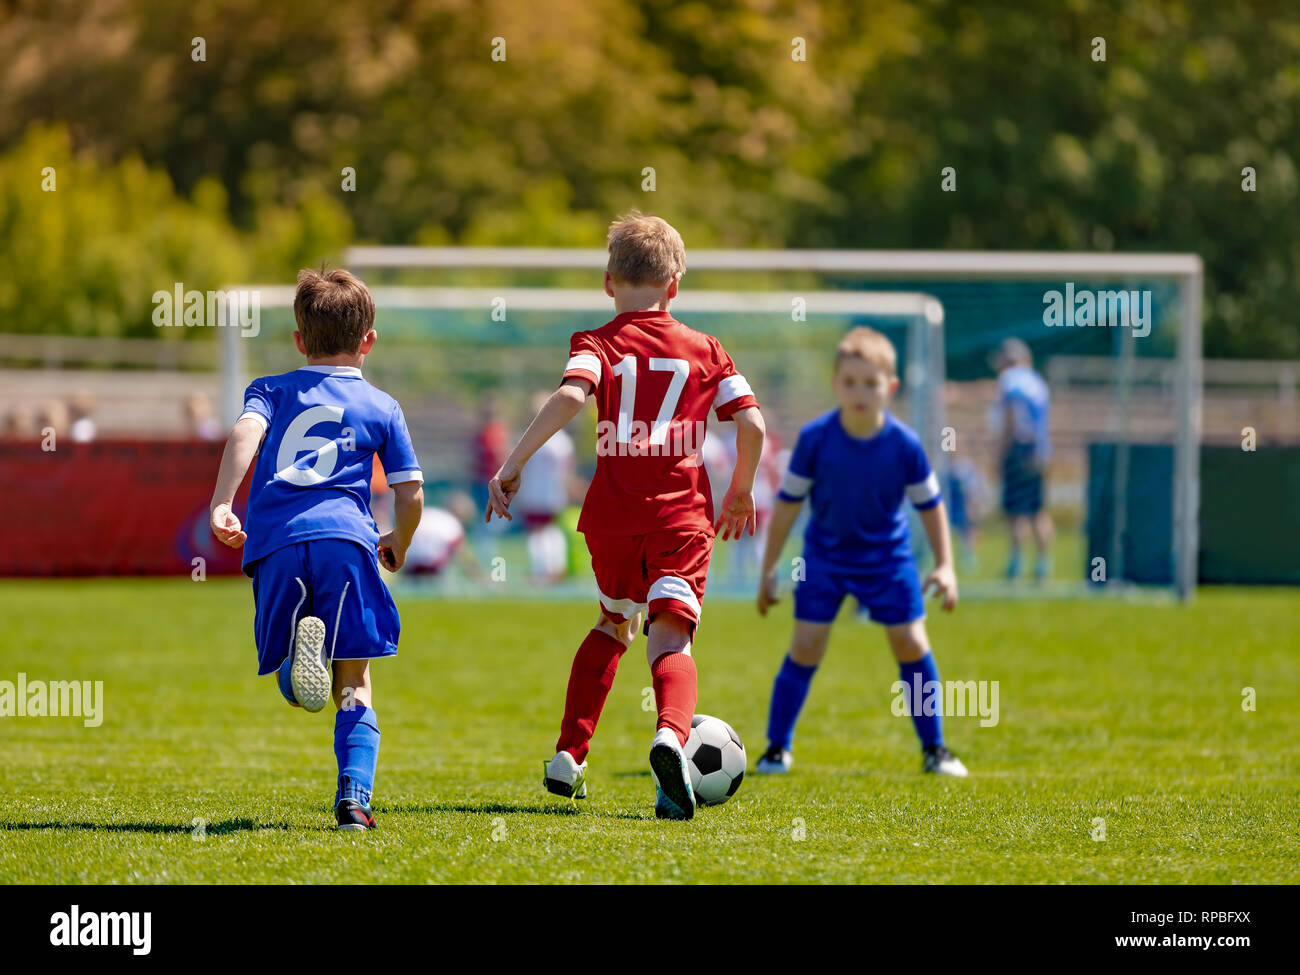 Footballers Kicking Football Match. Soccer School Tournament Game. Kids in Red and Blue Sports Jerseys. Young Soccer Players Running After the Ball. S Stock Photo